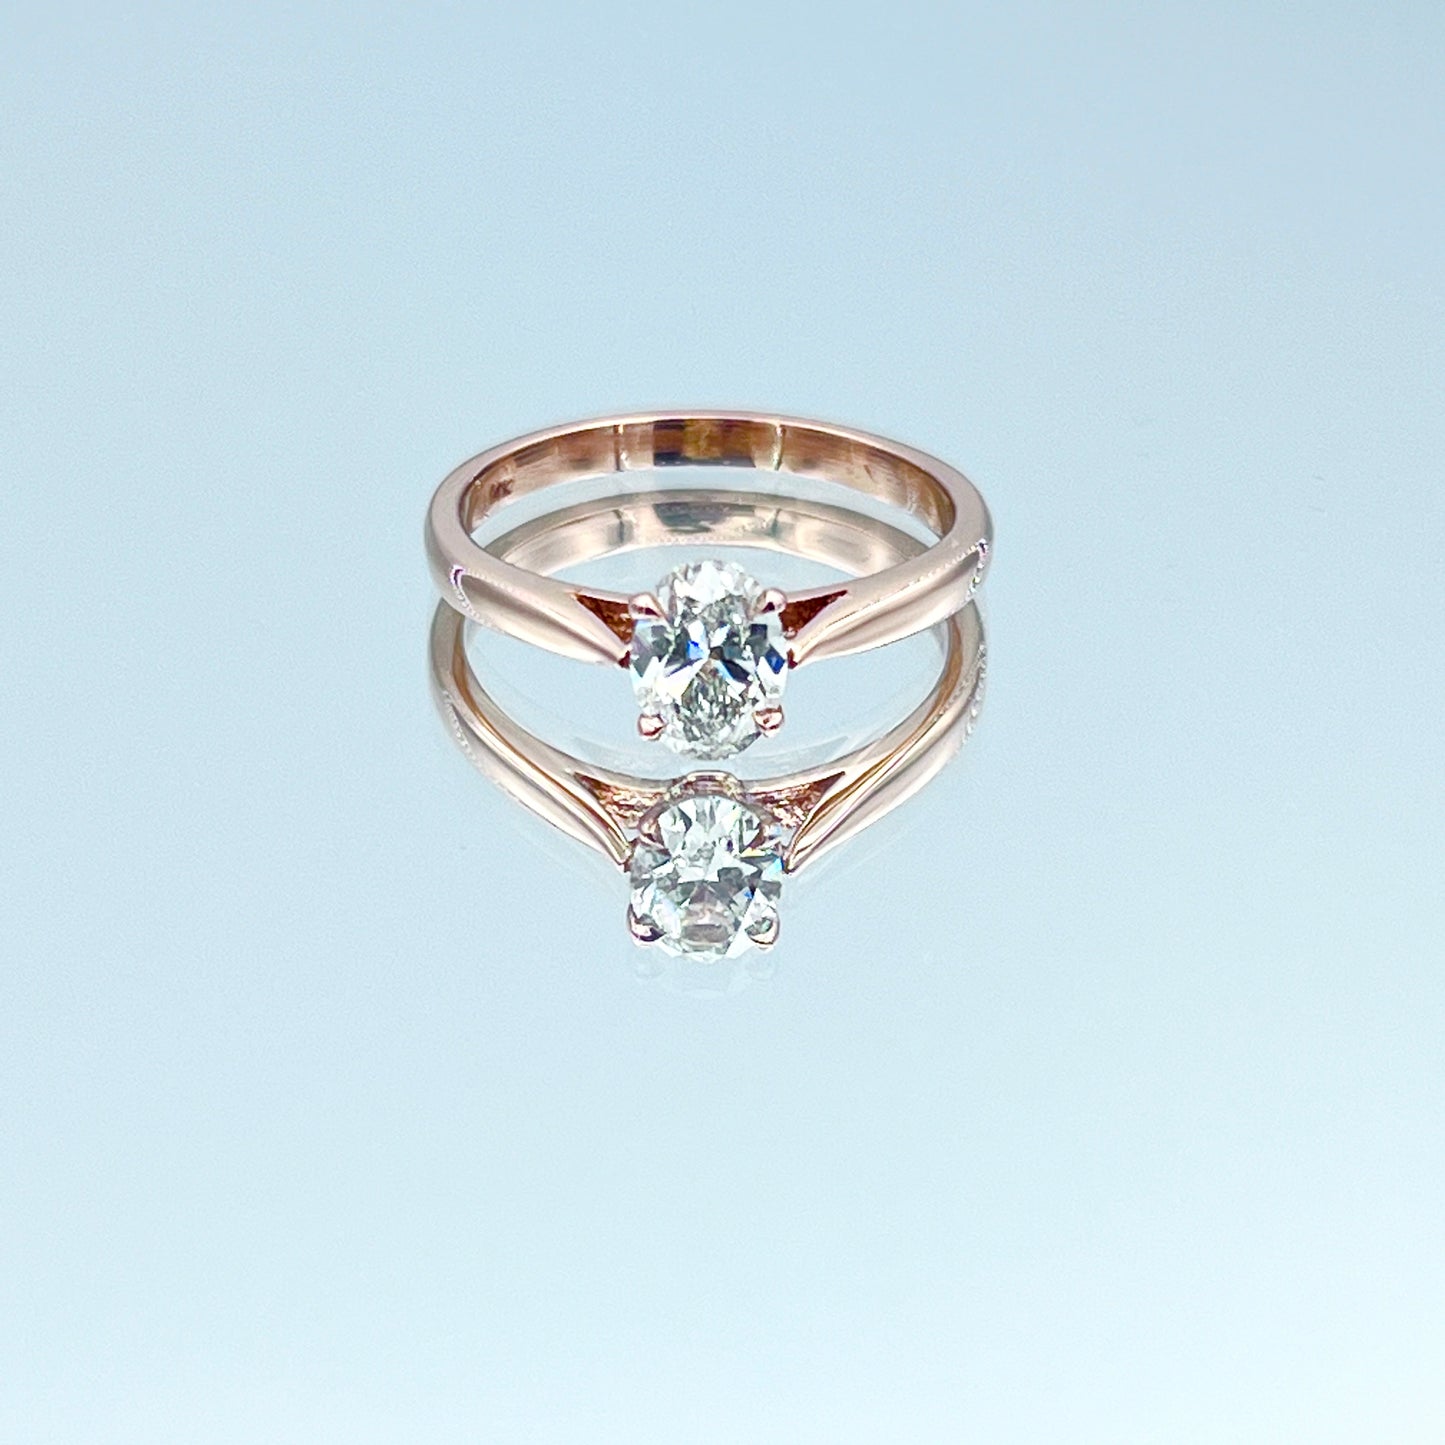 Solitaire Oval-Cut Diamond Engagement Ring in 14K Rose Gold - L and L Jewelry